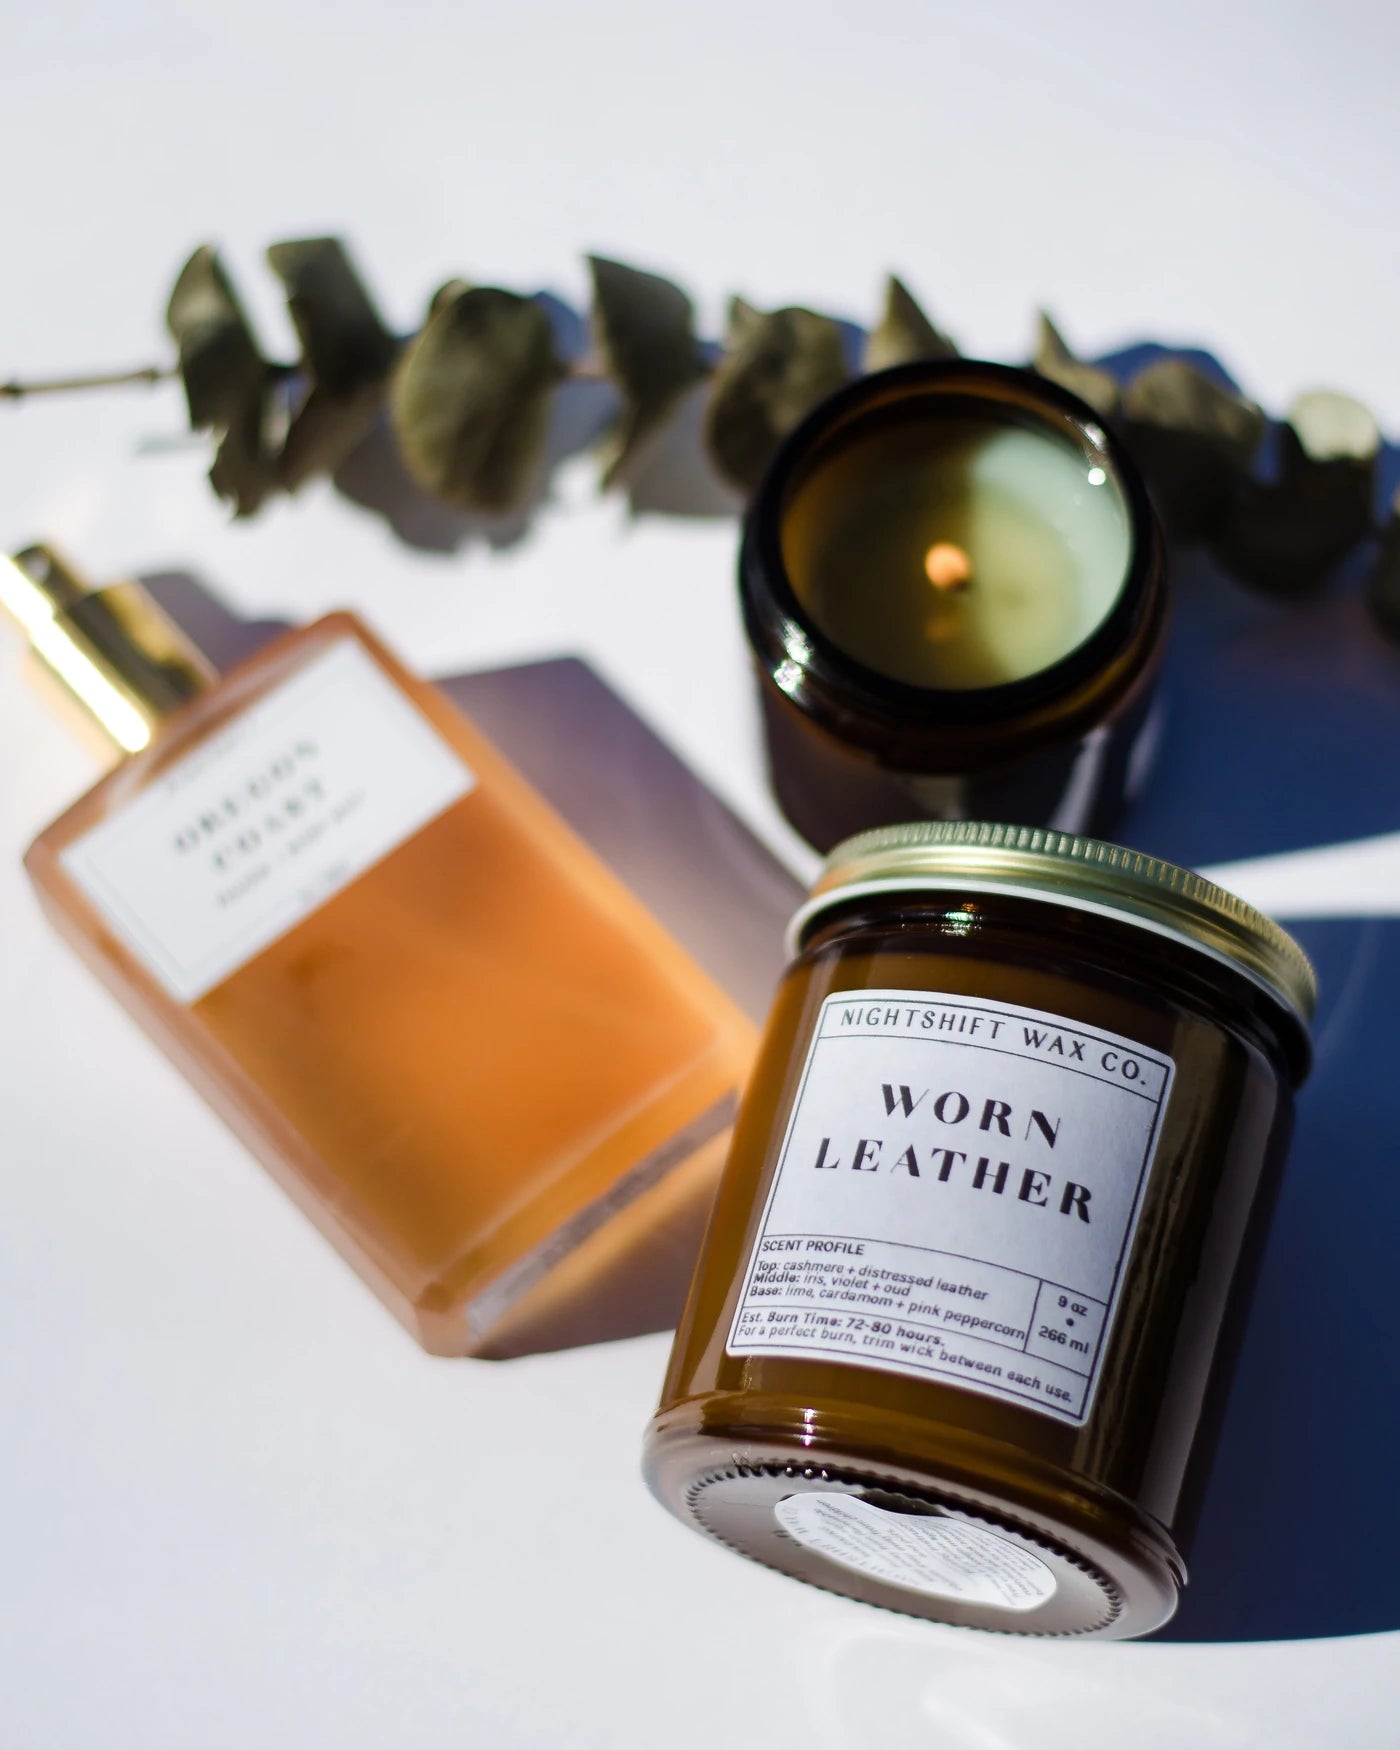 Nightshift Wax Co. Worn Leather Soy Candle | Prelude & Dawn | Los Angeles, CA